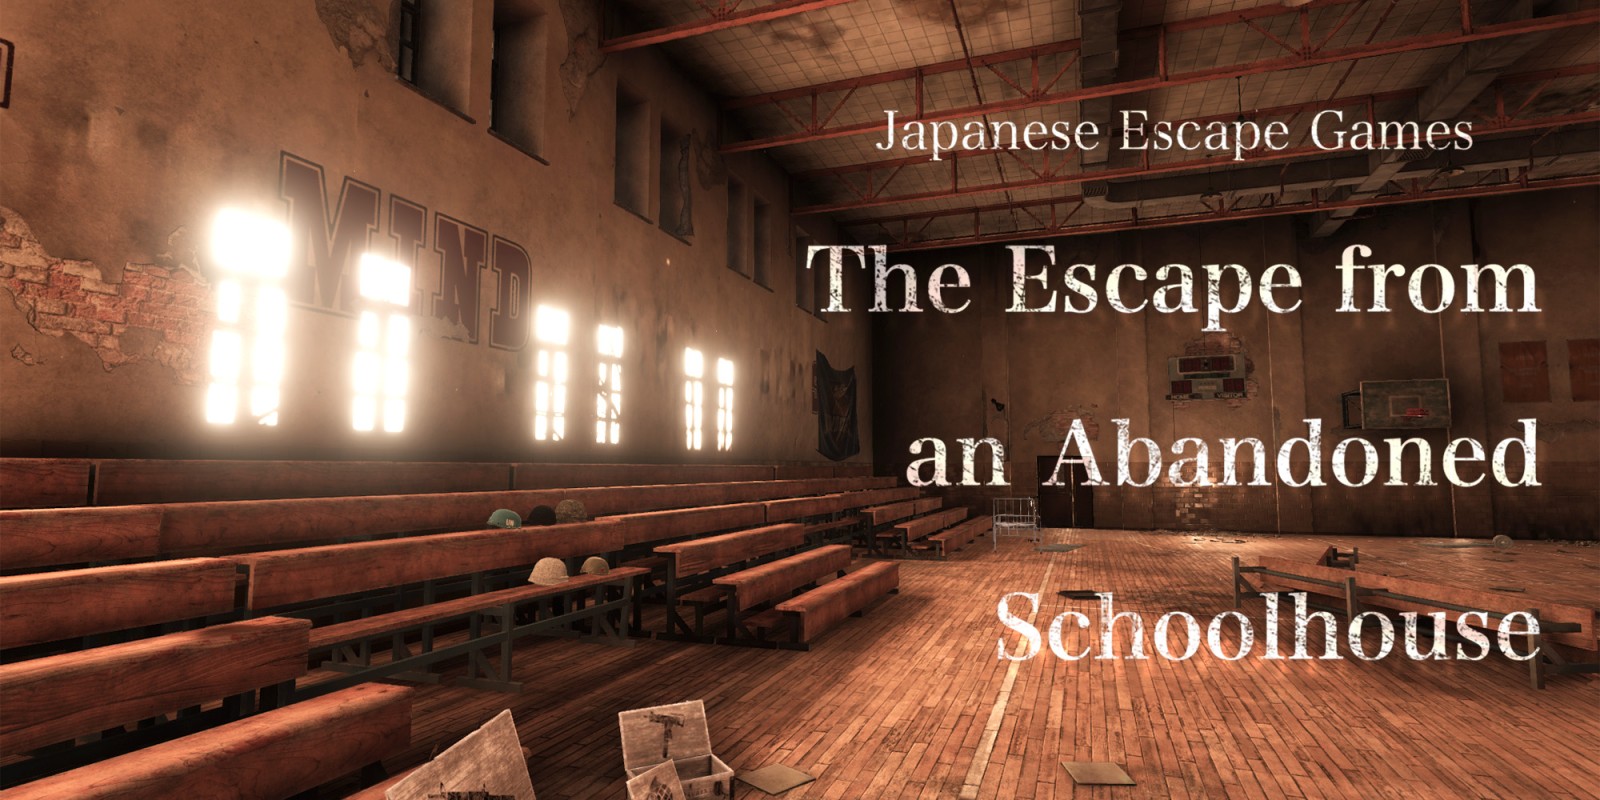 Japanese Escape Games The Abandoned Schoolhouse